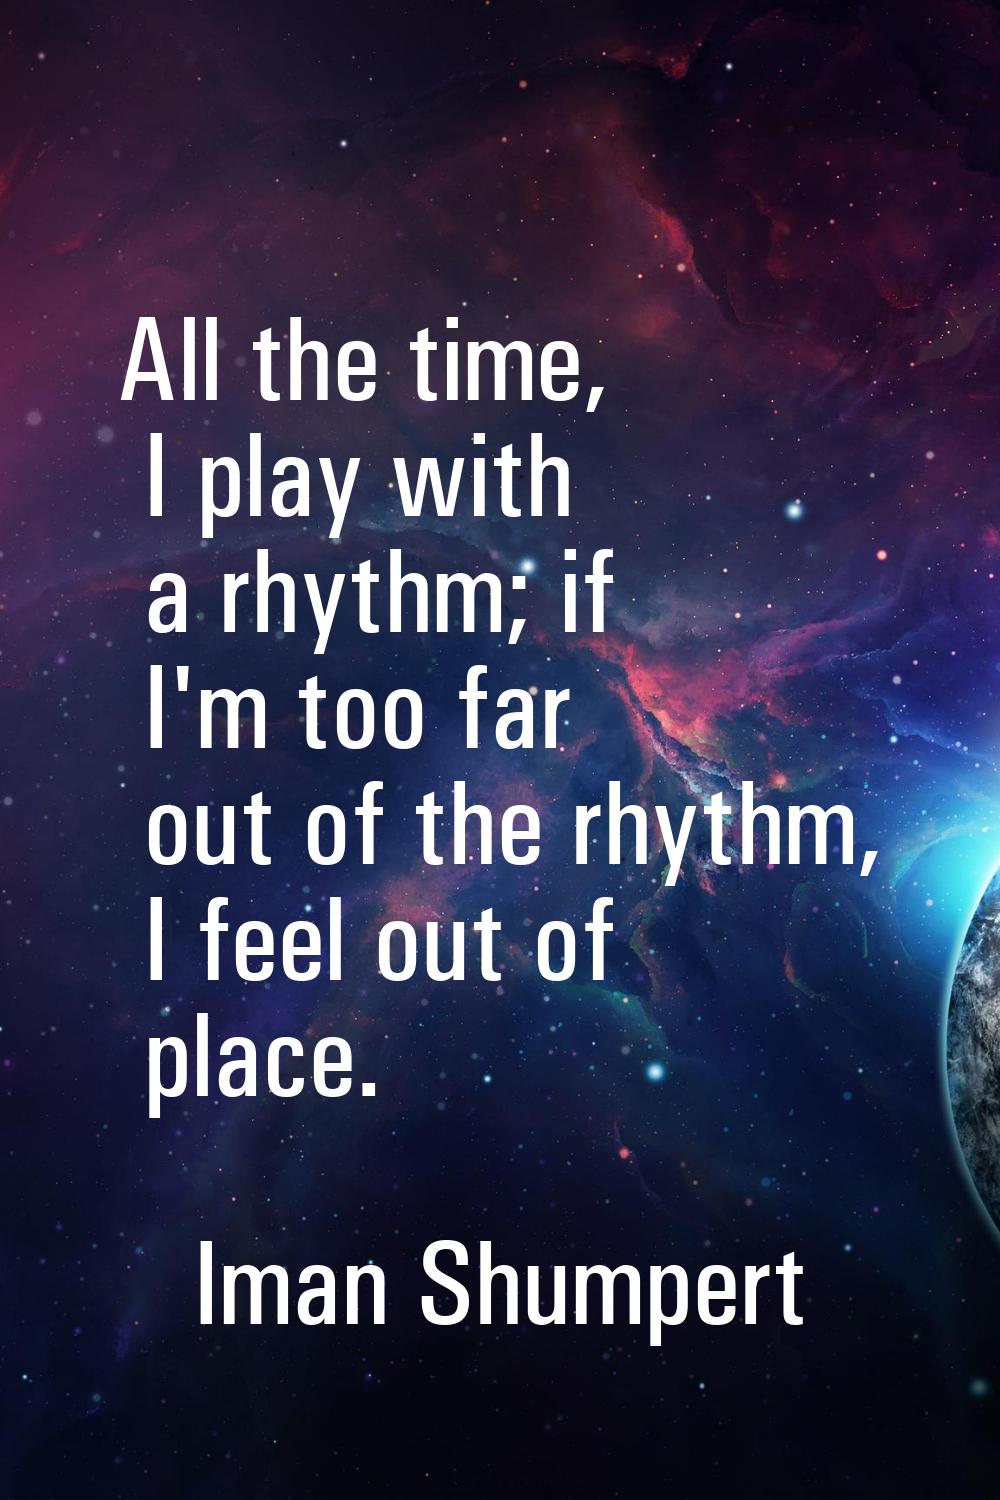 All the time, I play with a rhythm; if I'm too far out of the rhythm, I feel out of place.